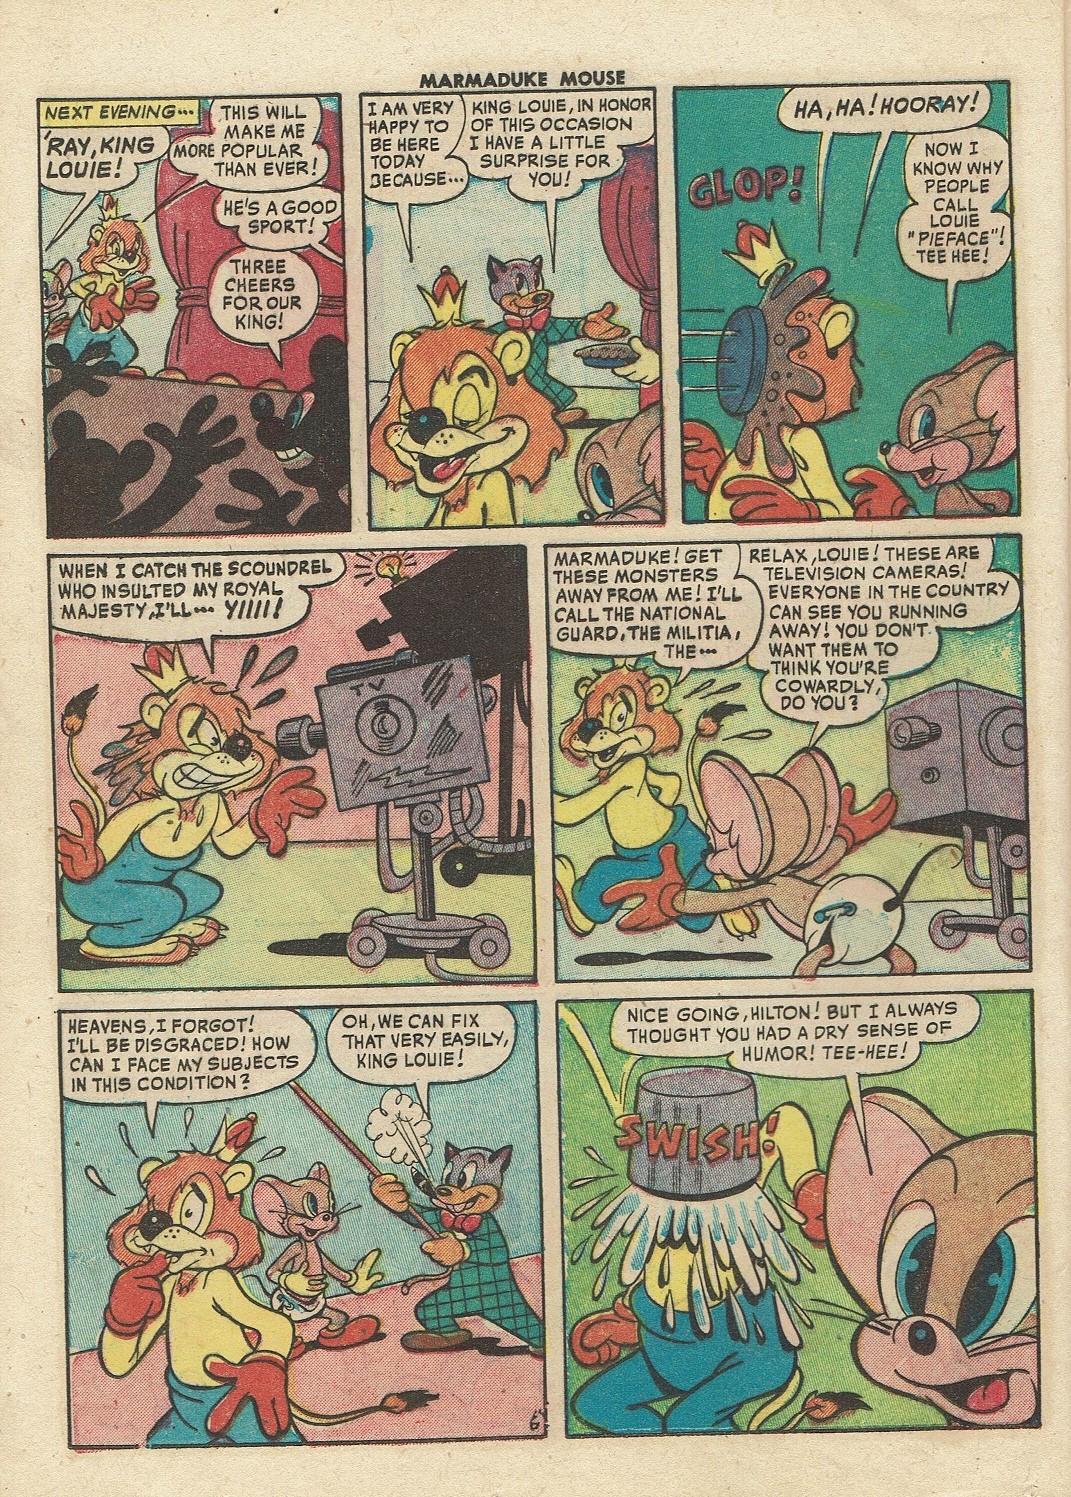 Read online Marmaduke Mouse comic -  Issue #29 - 24